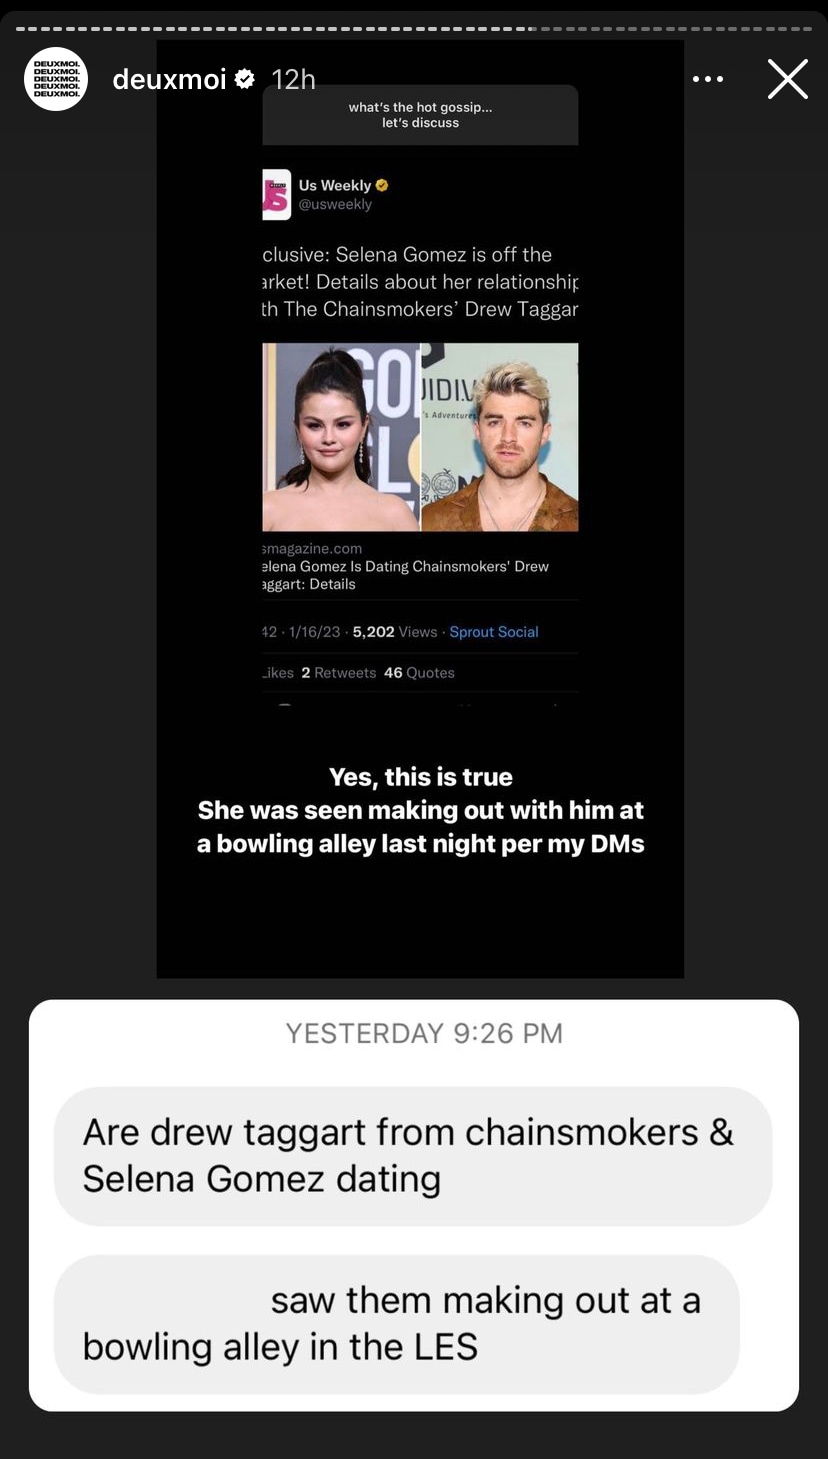 Instagram account Deuxmoi reported that they were told that Selena and Drew were seen together in New York City.